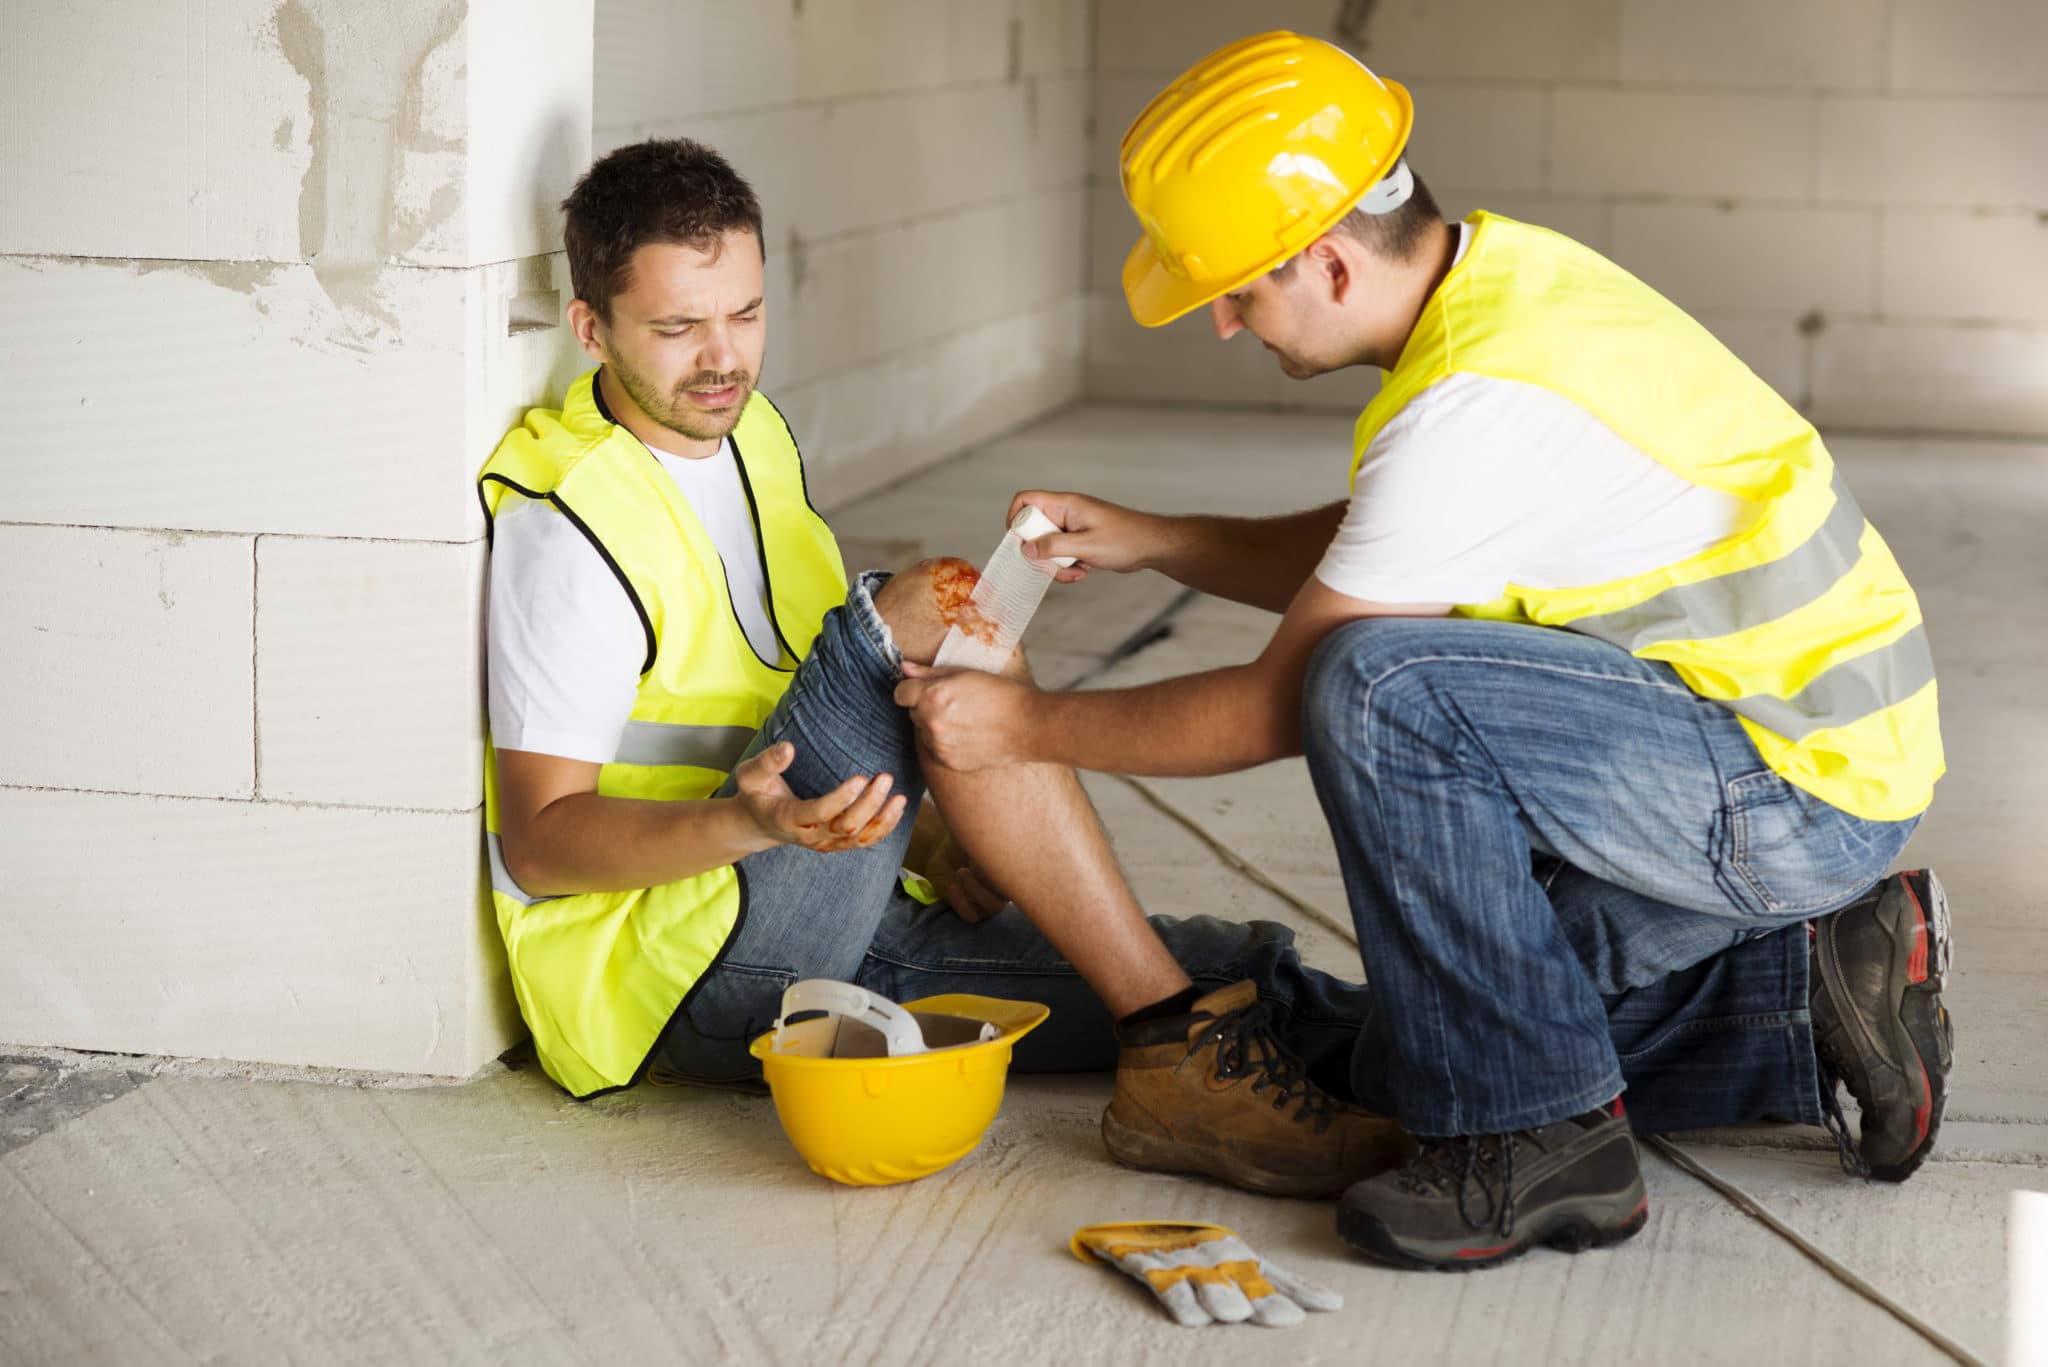 Steps to take after a work related accident